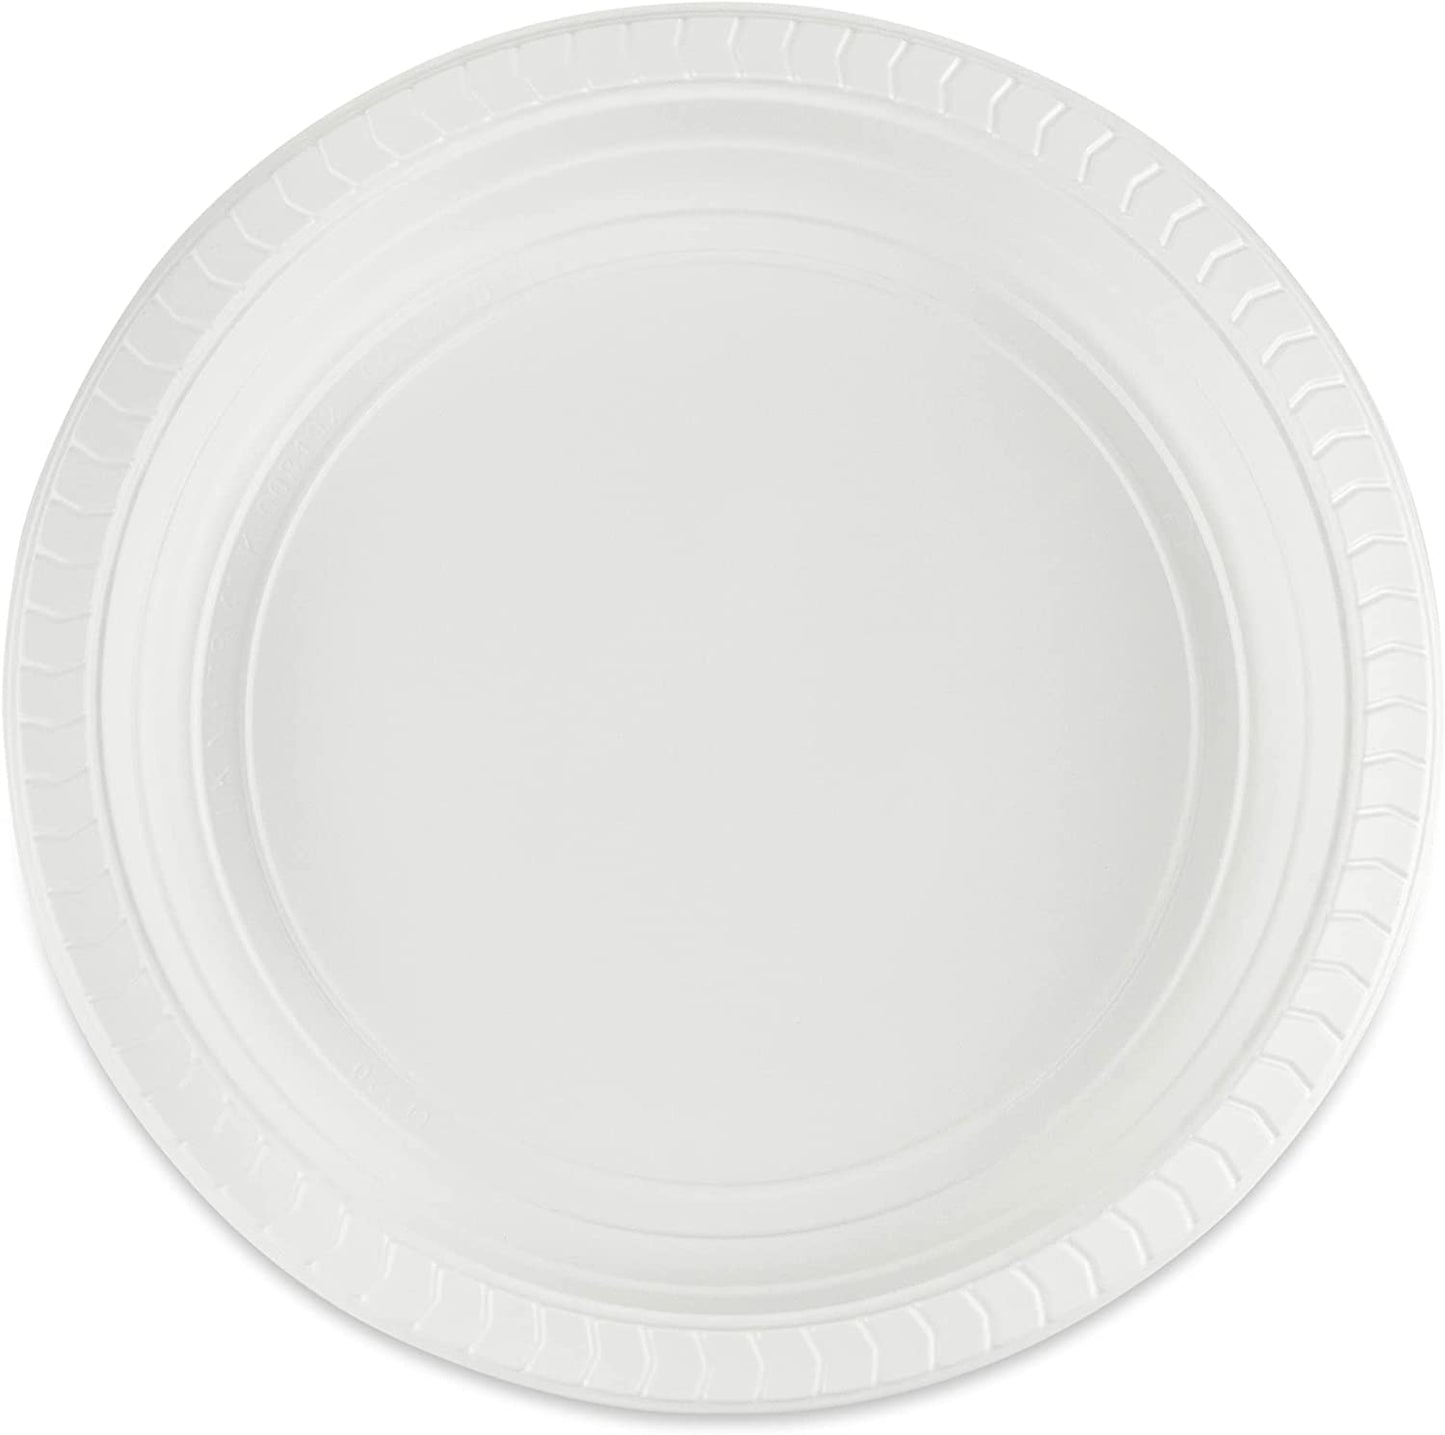 10" Disposable Lightweight White Plastic plates Good to use in Microwave Plastic Plates Blue Sky   